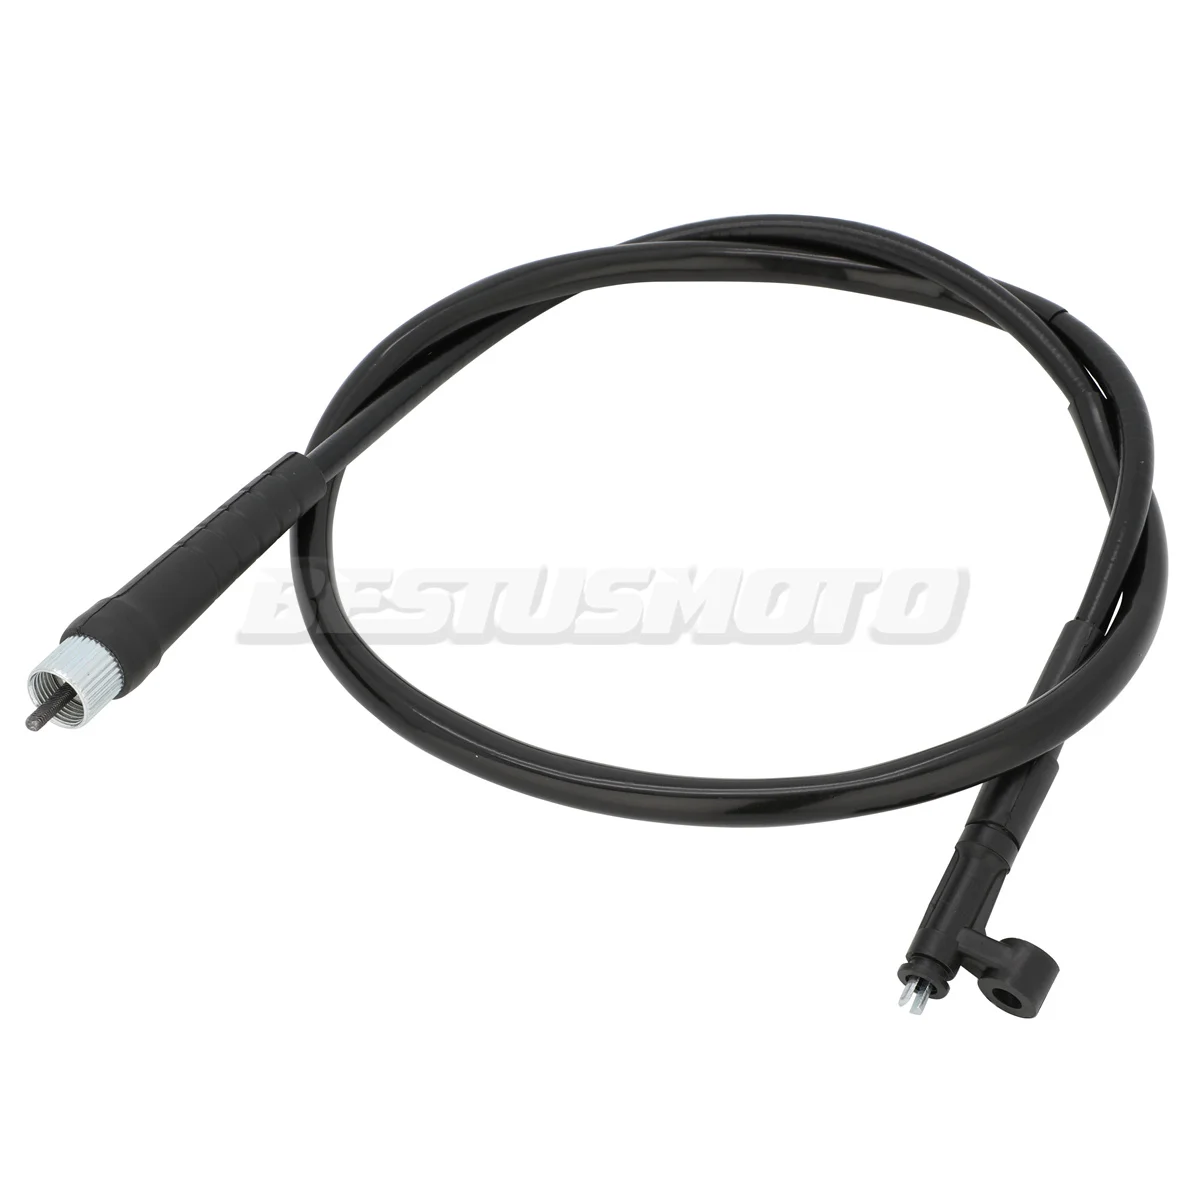 For Honda VLX400/600 Steed 400 600 Magna 250 750 Motorcycle Speedometer Wires Cable Scooter Accessories Speedo Lines Parts